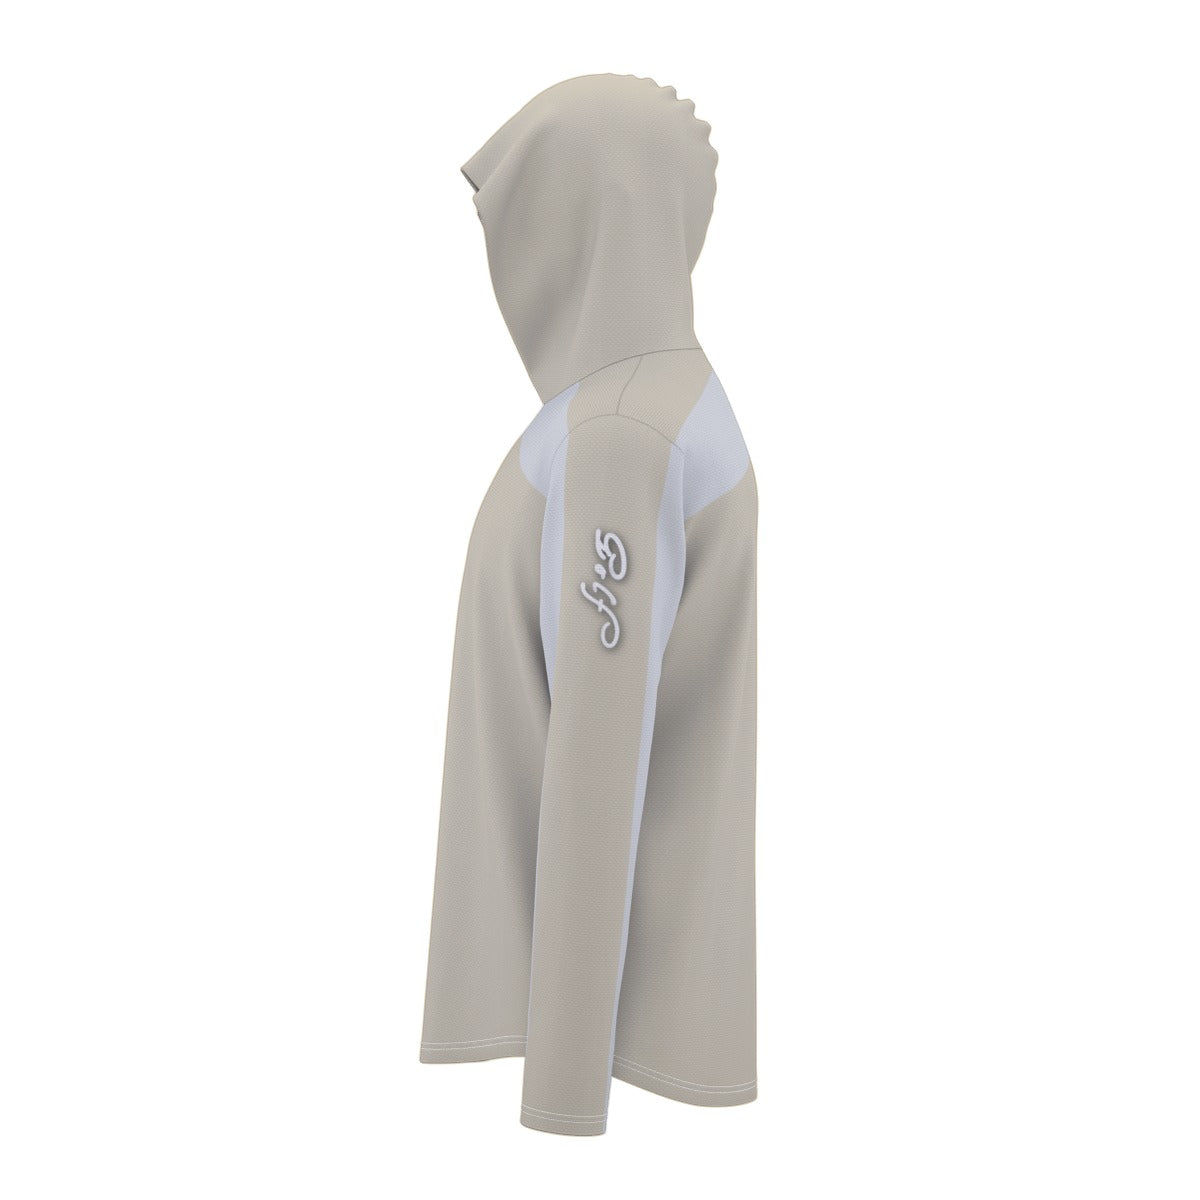 Elevated light weight UV protected sports hoodie with thumb hole